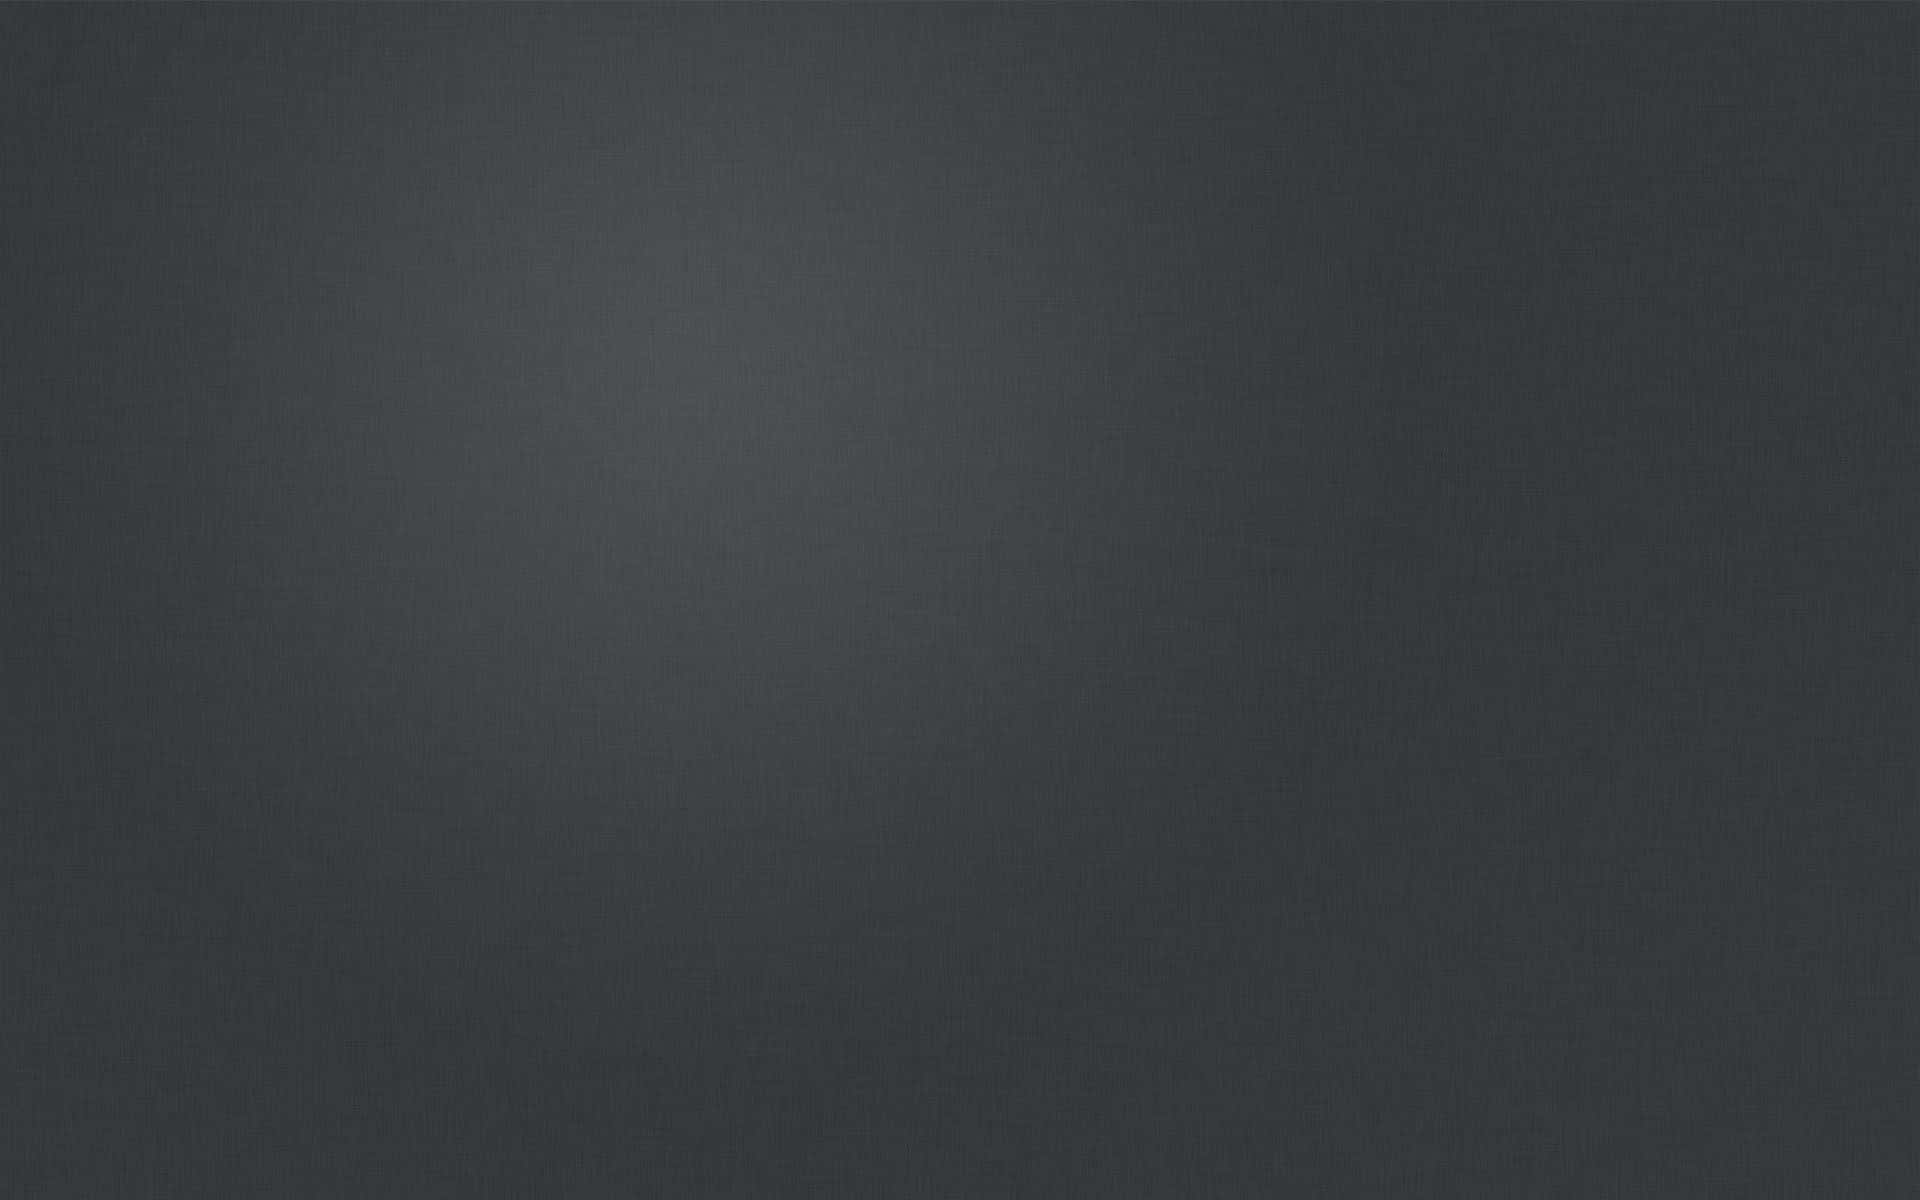 An abstract background of solid dark grey color